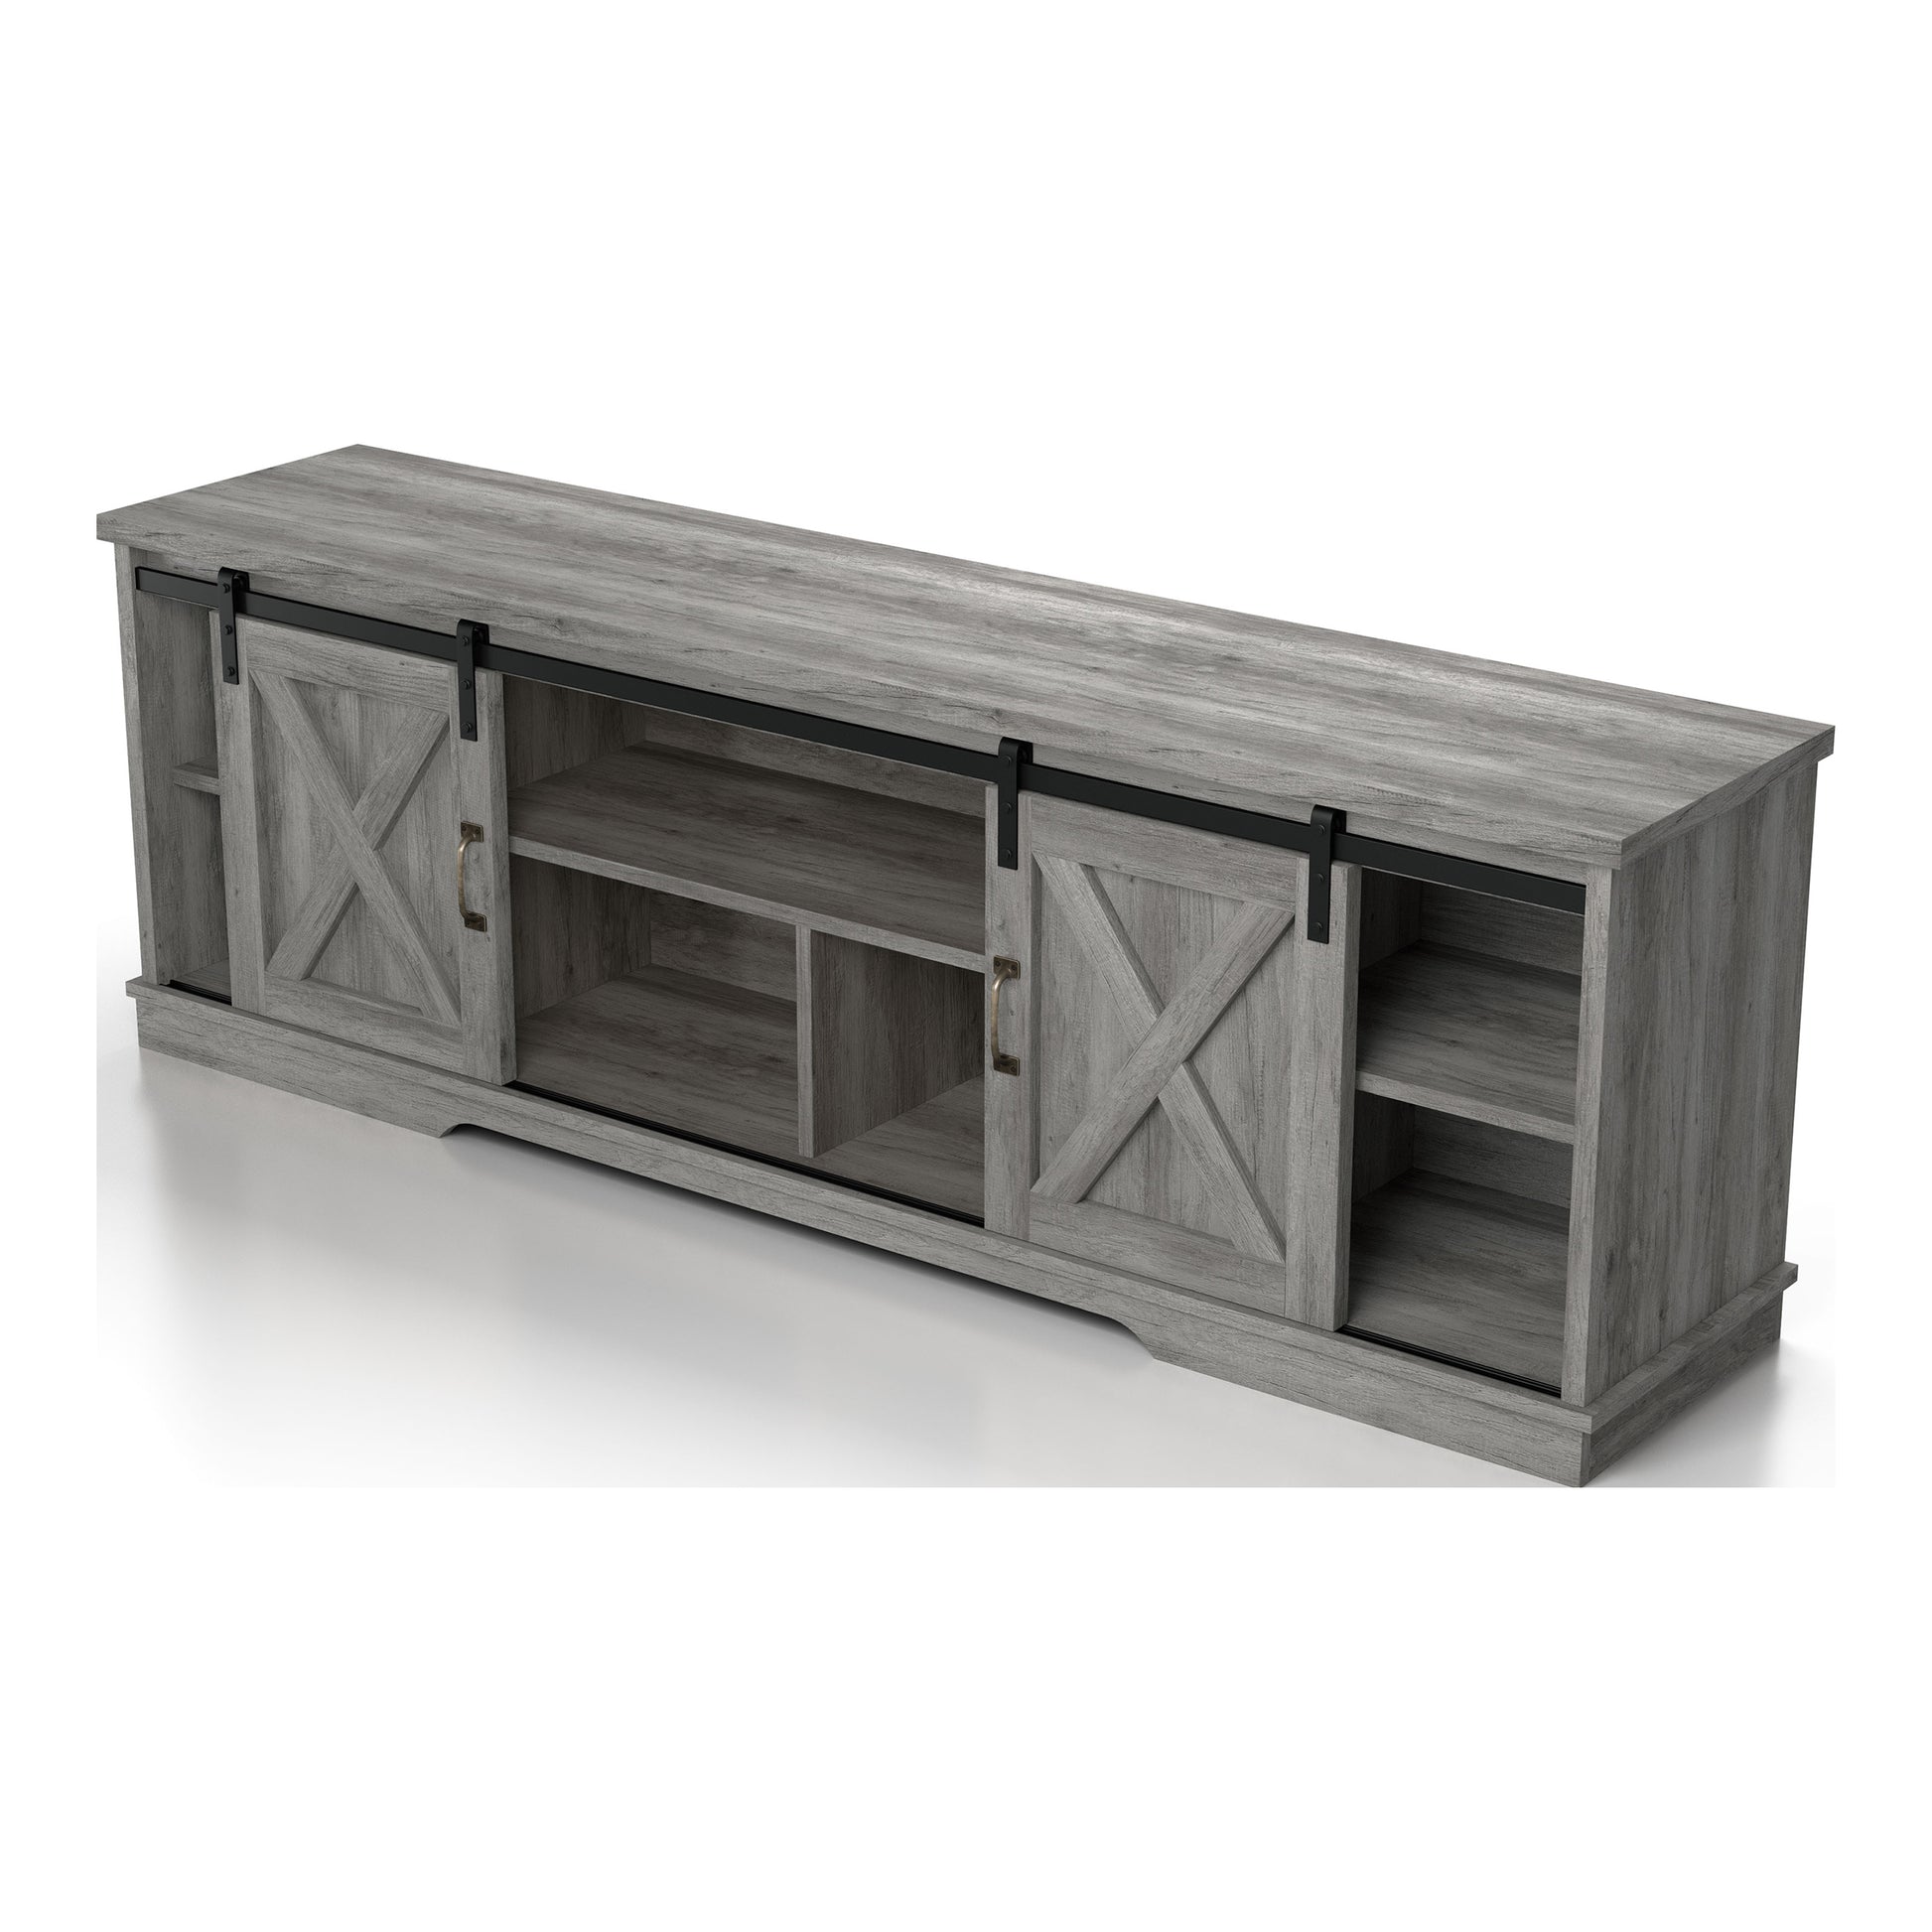 Left angled stand with sliding doors only from a three-piece rustic vintage gray oak TV stand and pier entertainment set on a white background